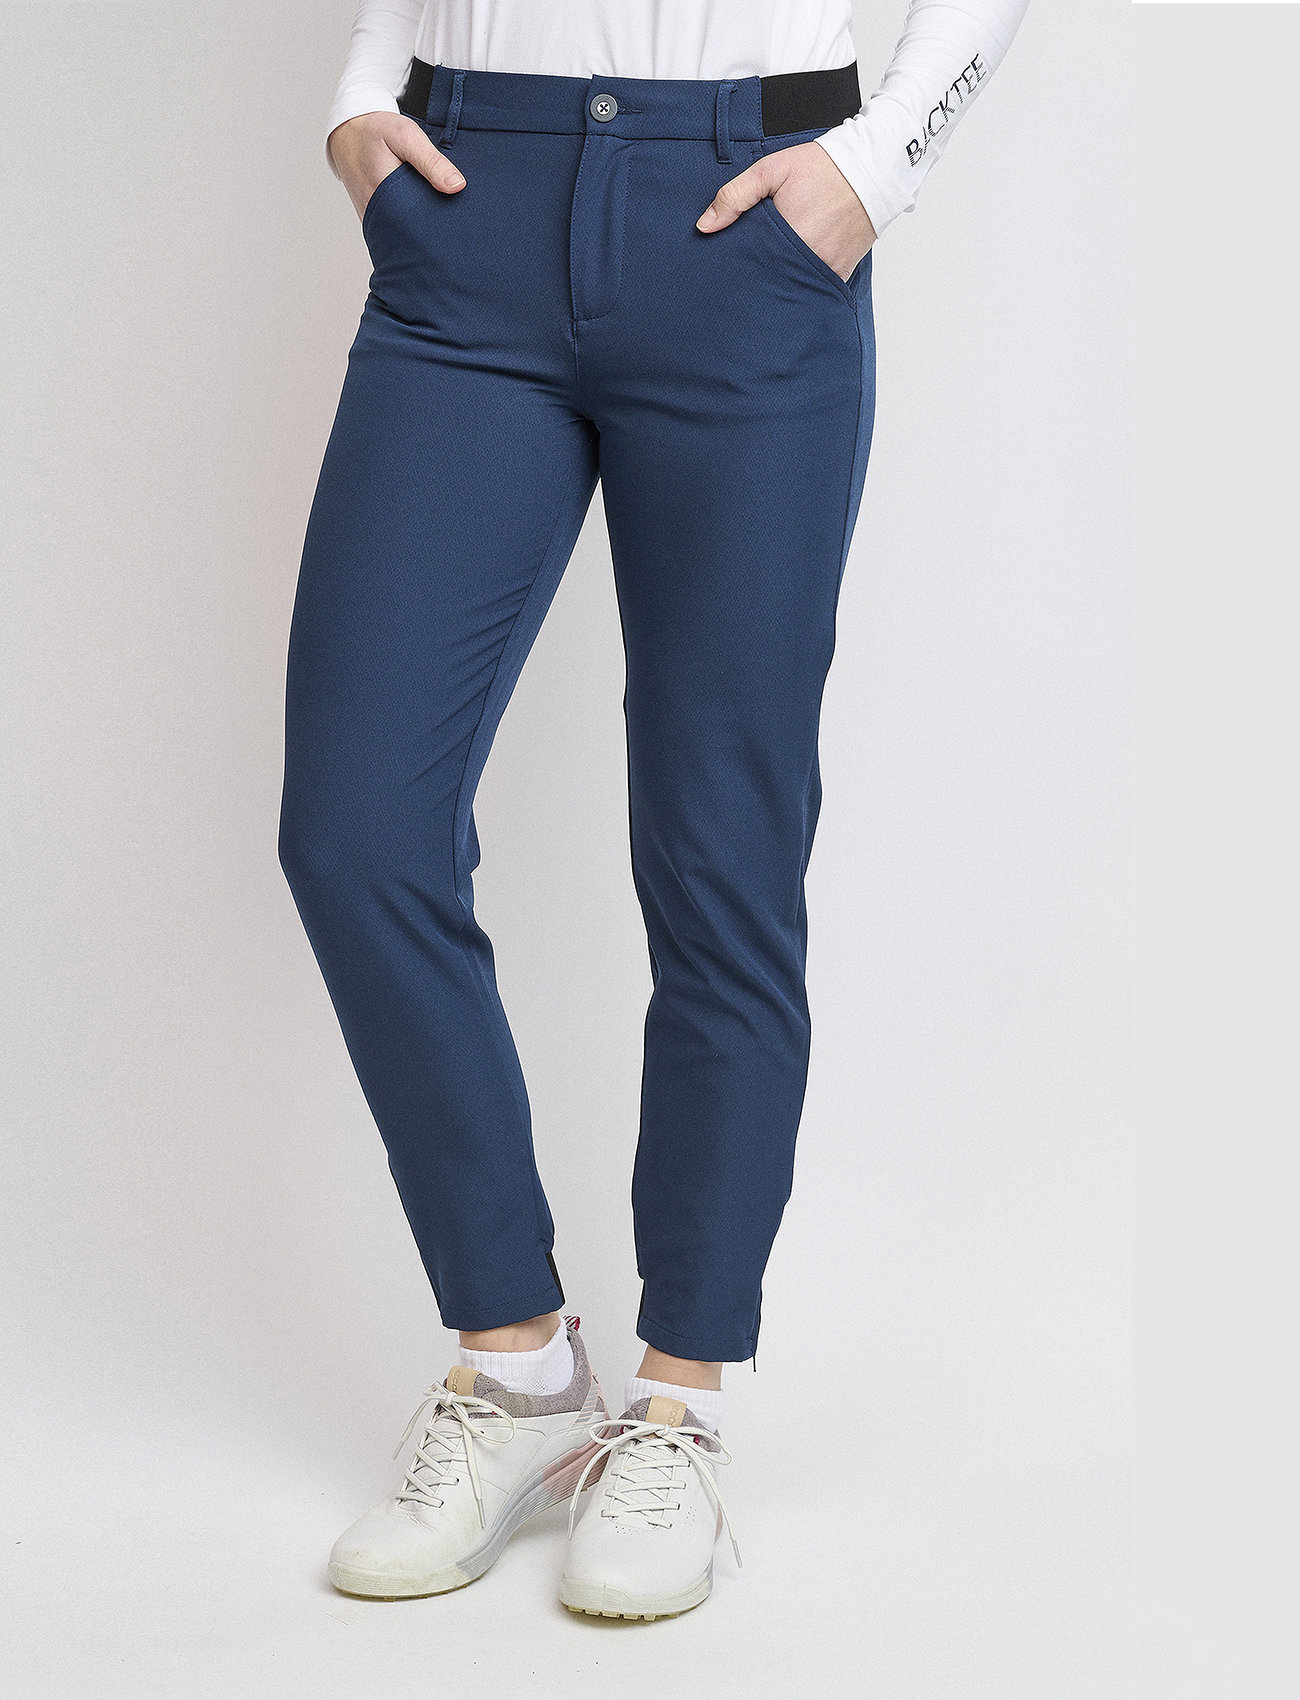 BACKTEE - Ladies Sports Pants - plus size - navy - 1